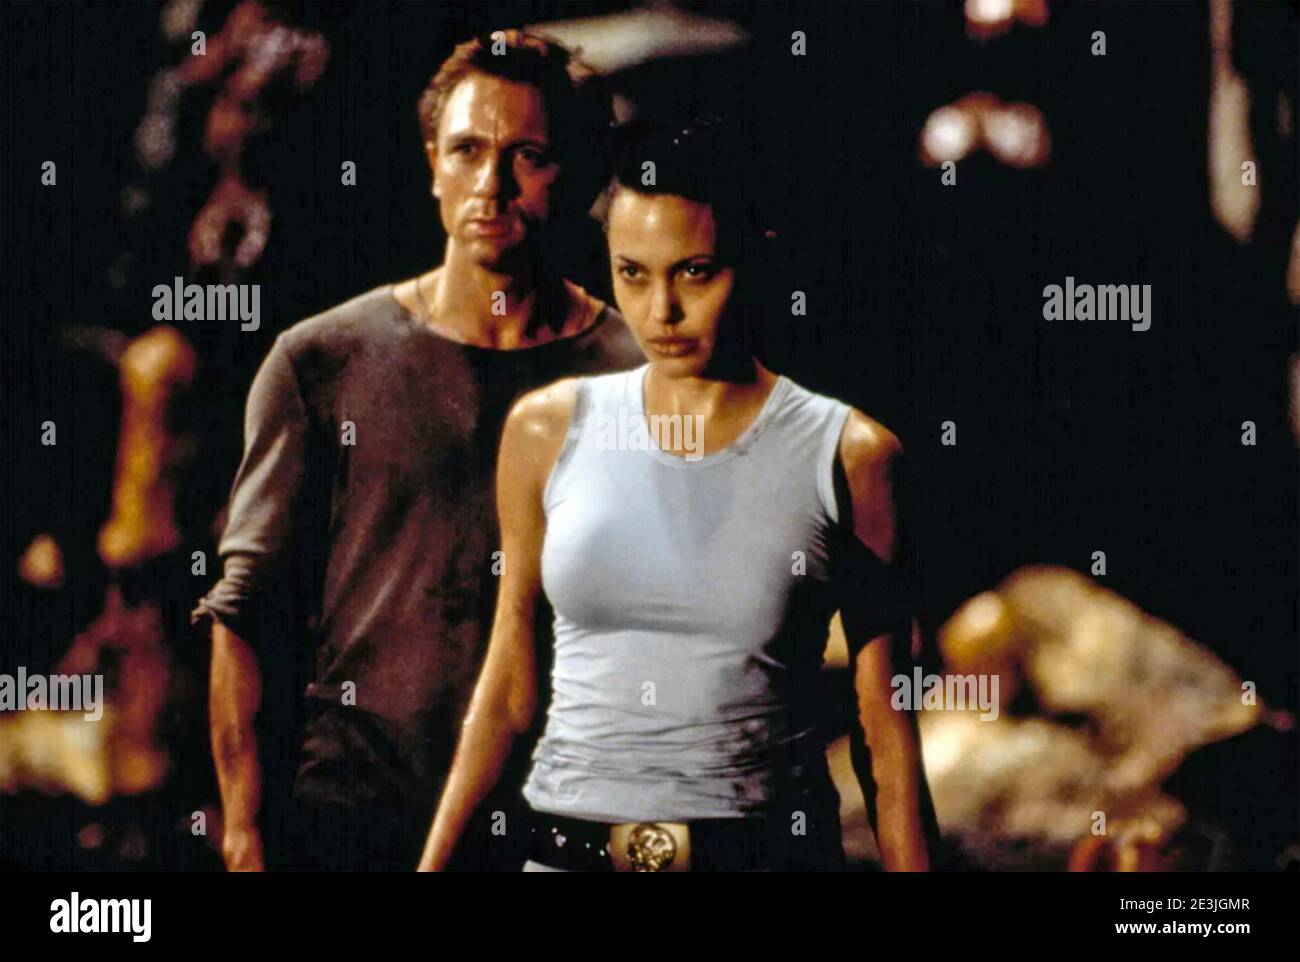 LARA CROFT:  TOMB RAIDER 2001 Paramount Pictures/United International Pictures film with Angelina Jolie and Daniel Craig Stock Photo